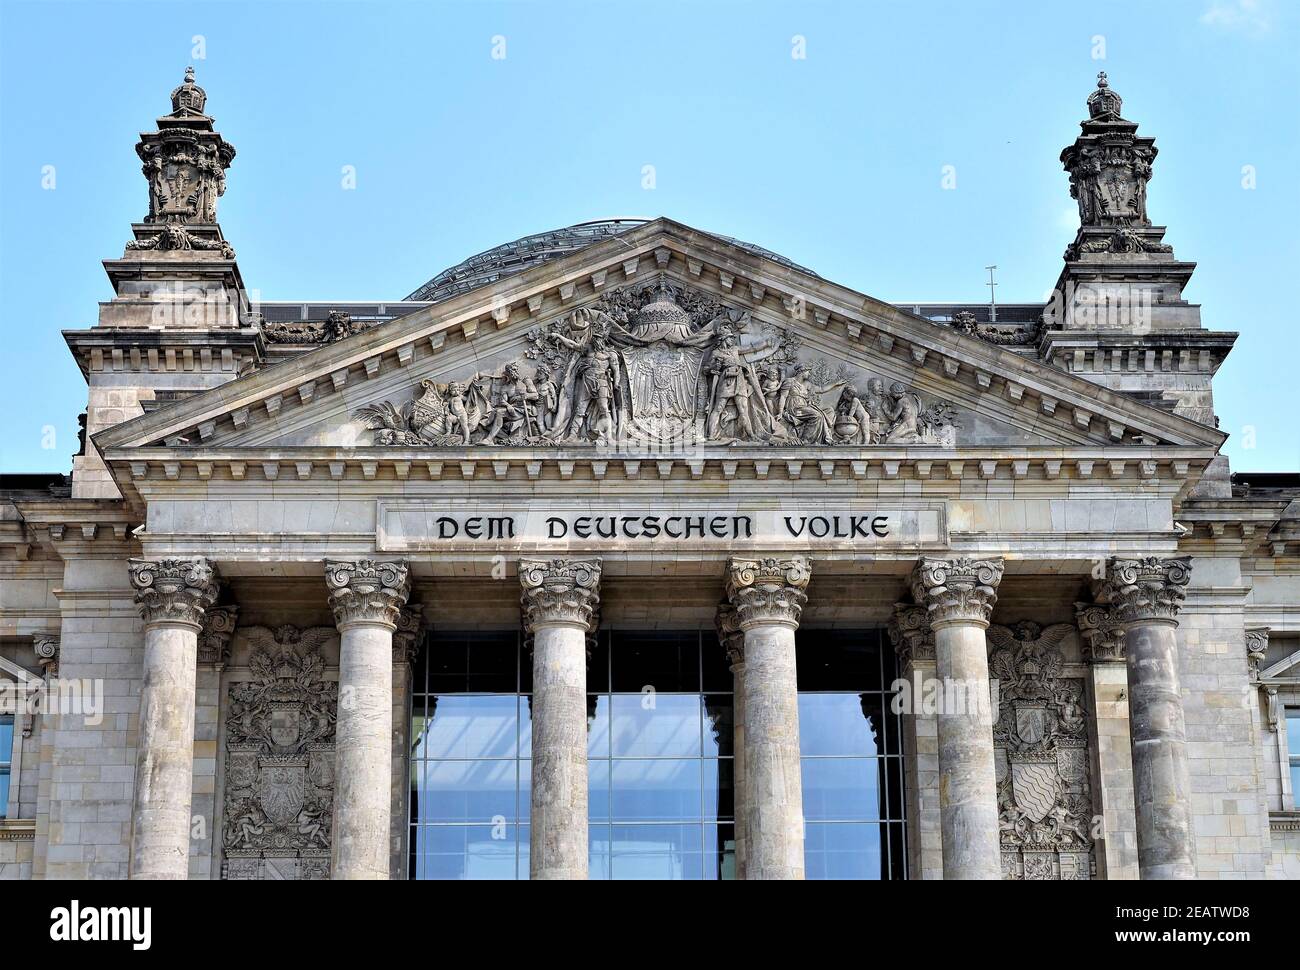 Gable of the Main Entrance of the Reichstag Building - Berlin Stock Photo